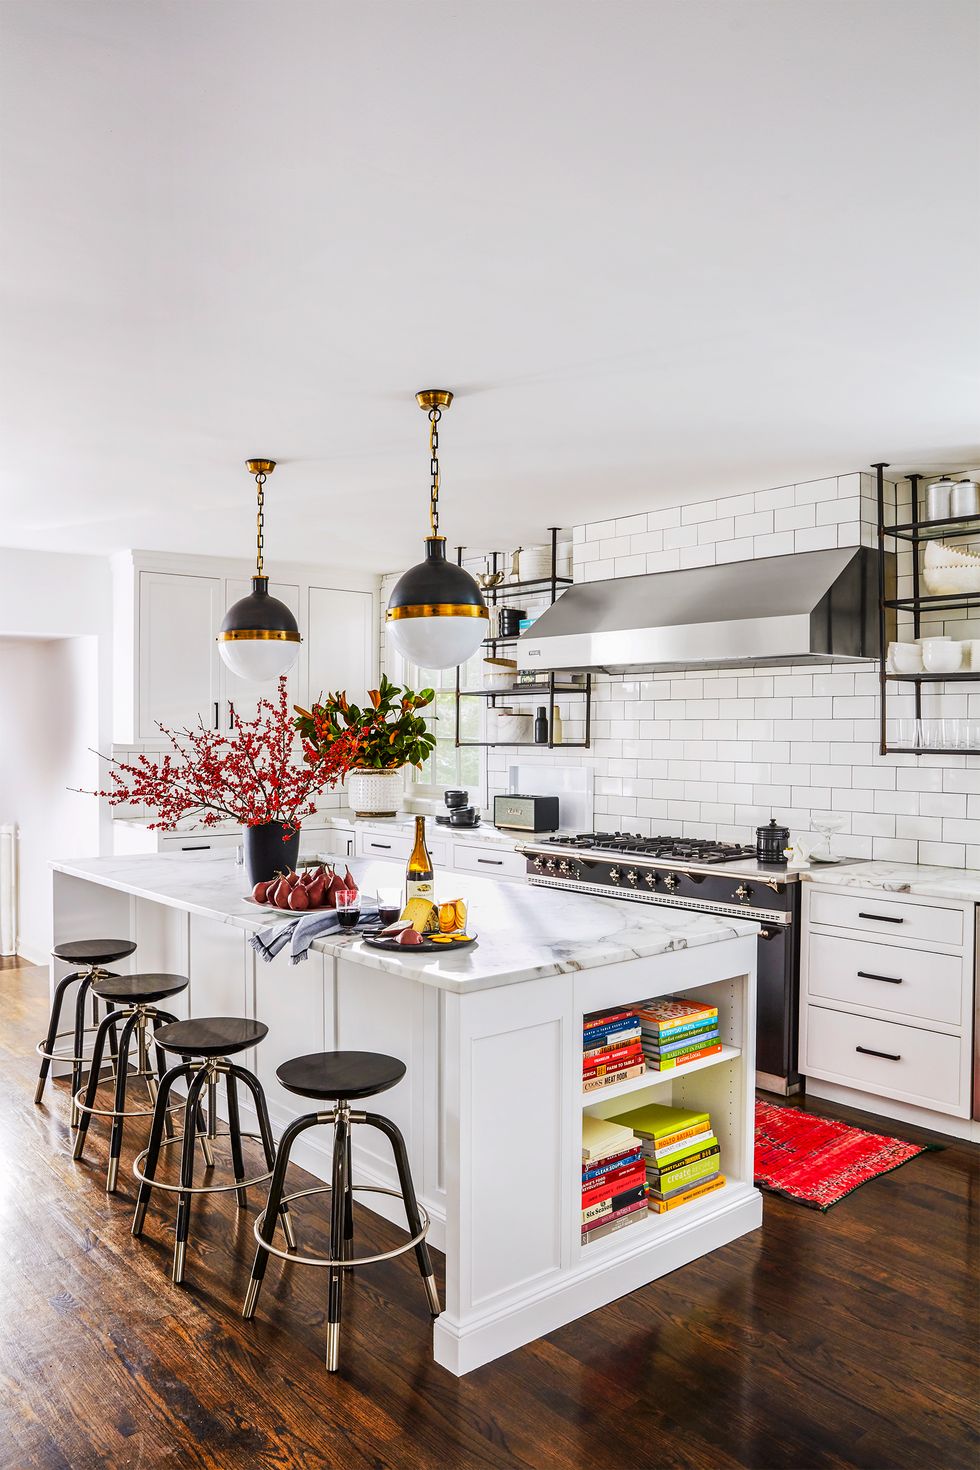 White Cabinets With Black Appliances: 17 Stunning Kitchens